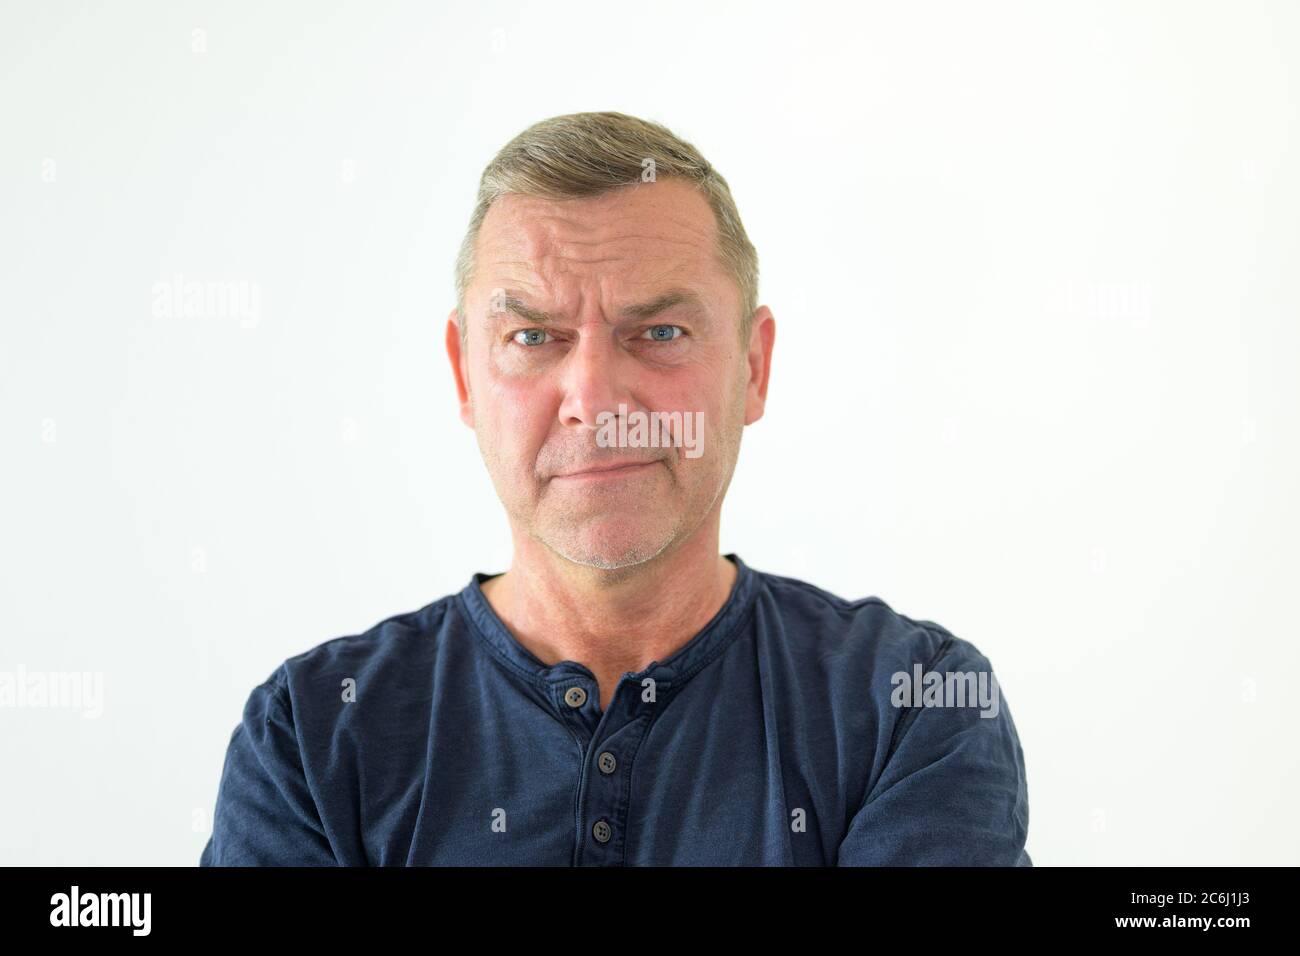 Perplexed man staring at the camera in confusion frowning with a wry smile in a head and shoulders portrait on a white background Stock Photo